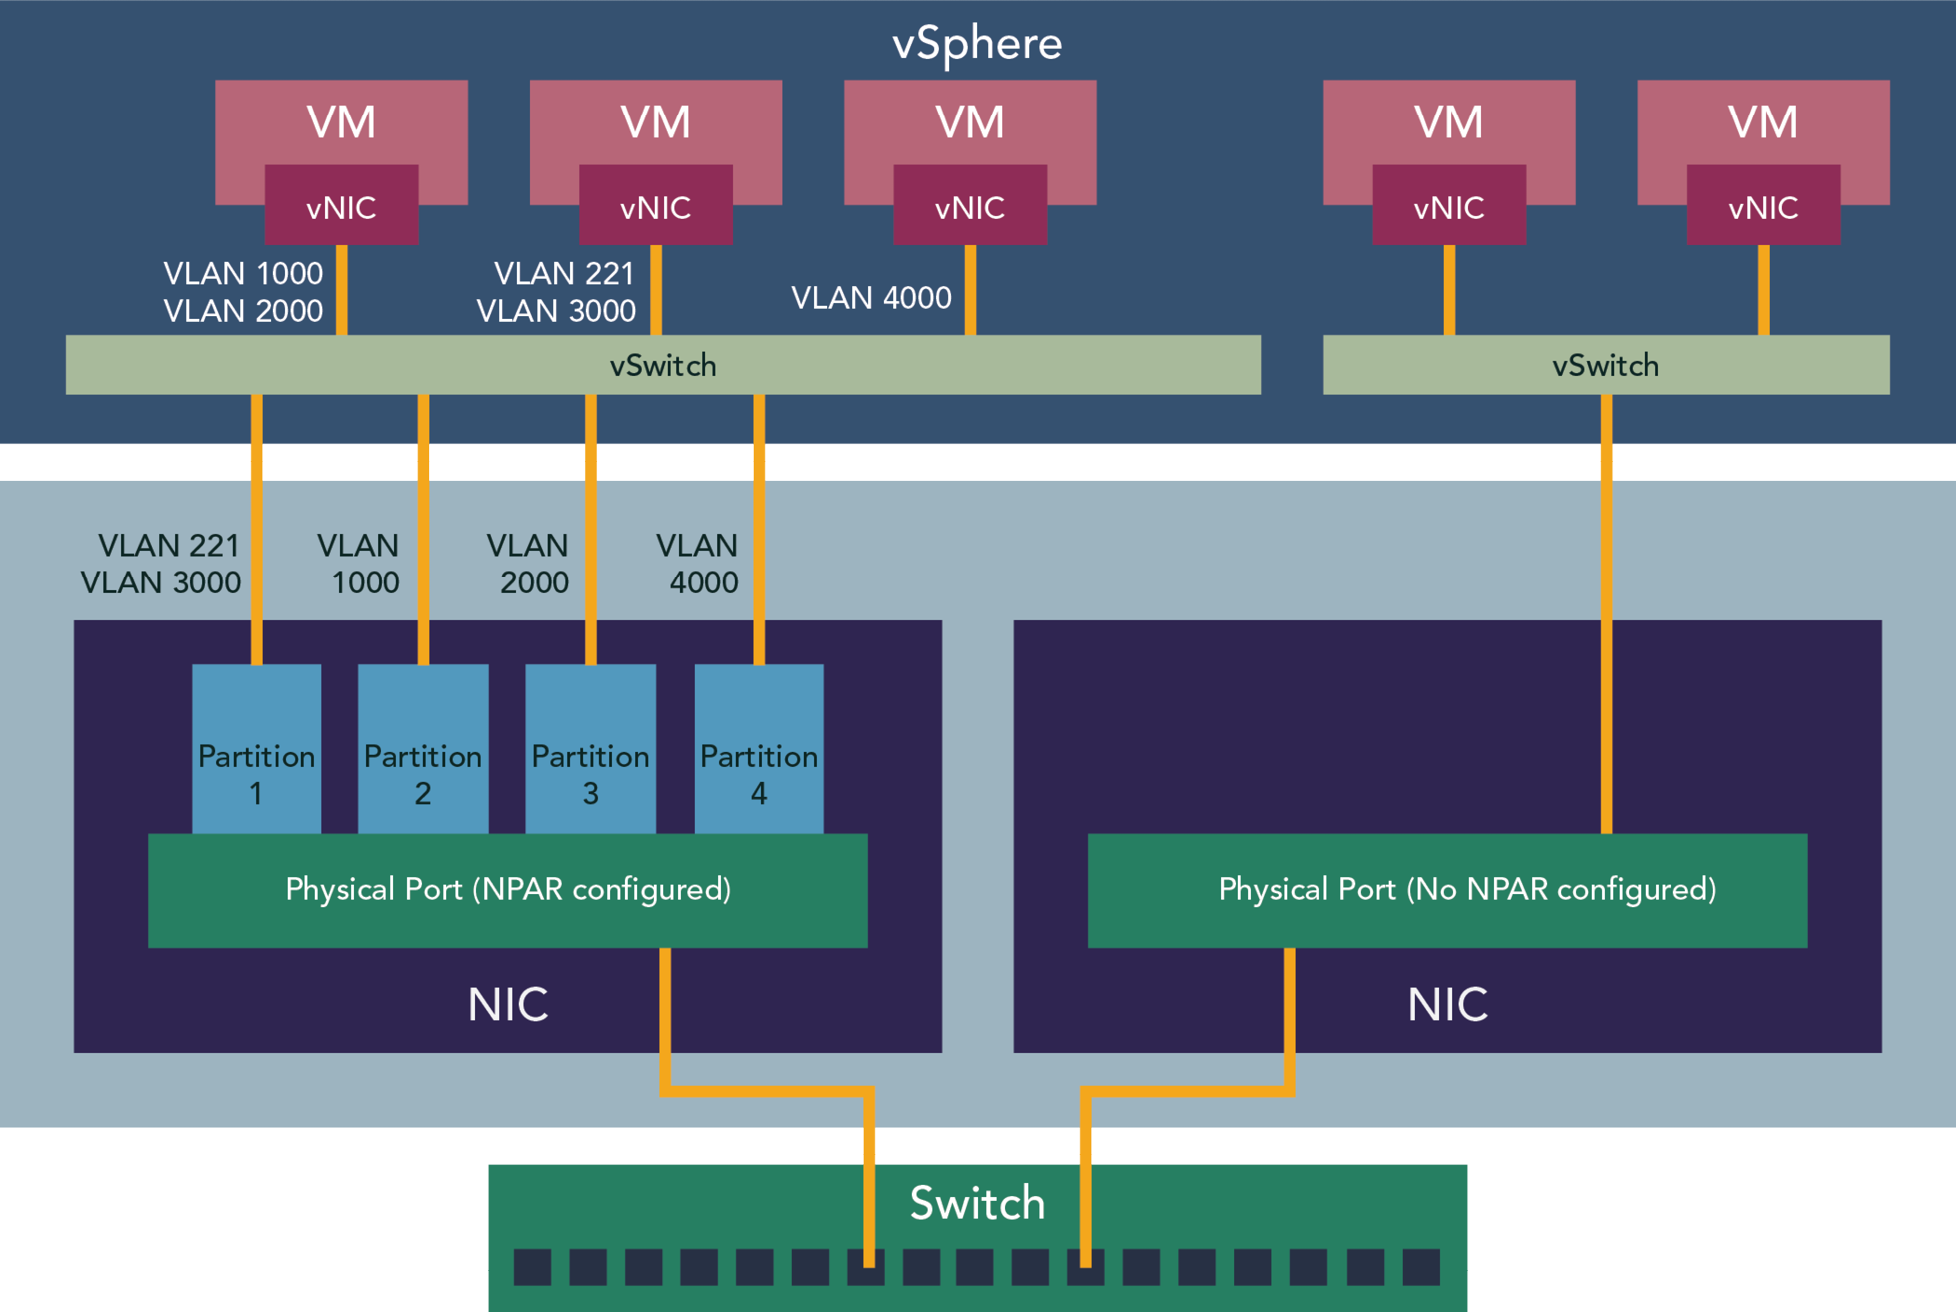 Diagram of Advanced NPAR functionality using the Dell PowerEdge MX and Broadcom 57504. vSphere shows three VMs connecting with three vNICs to a vSwitch using VLANS. The vSwitch is connected to a Physical Port (NPAR configured) in four partitions in a NIC using VLANS. The Physical Port is connected to a switch. vSphere also shows two VMs connecting with two vNICs to a vSwitch, which is connected to a Physical Port (No NPAR configured) in a NIC which connects to a switch. 